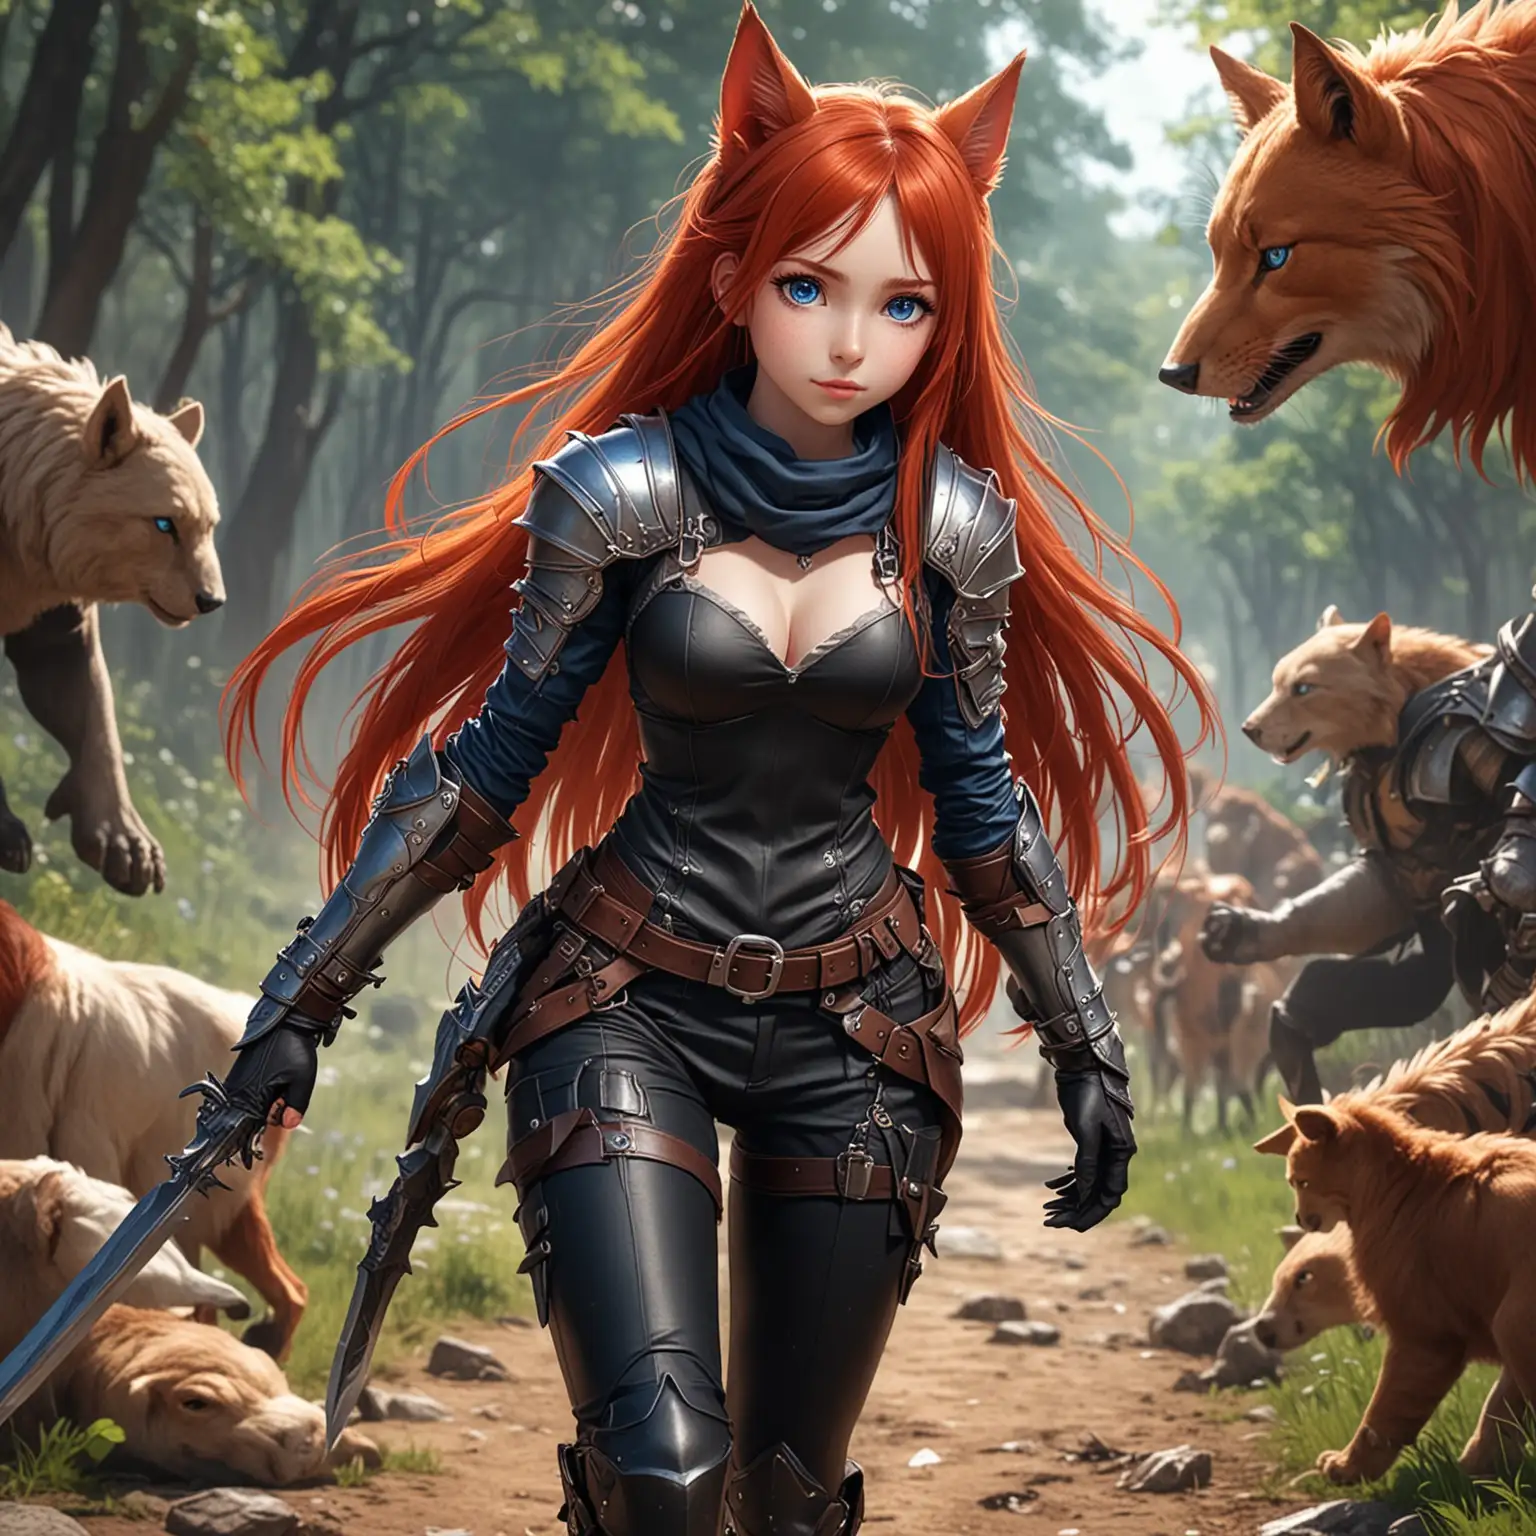 Anime girl, blue eyes, long red hair, pointed ears, adventurer's armor, black pants, followed by animals, dynamic pose